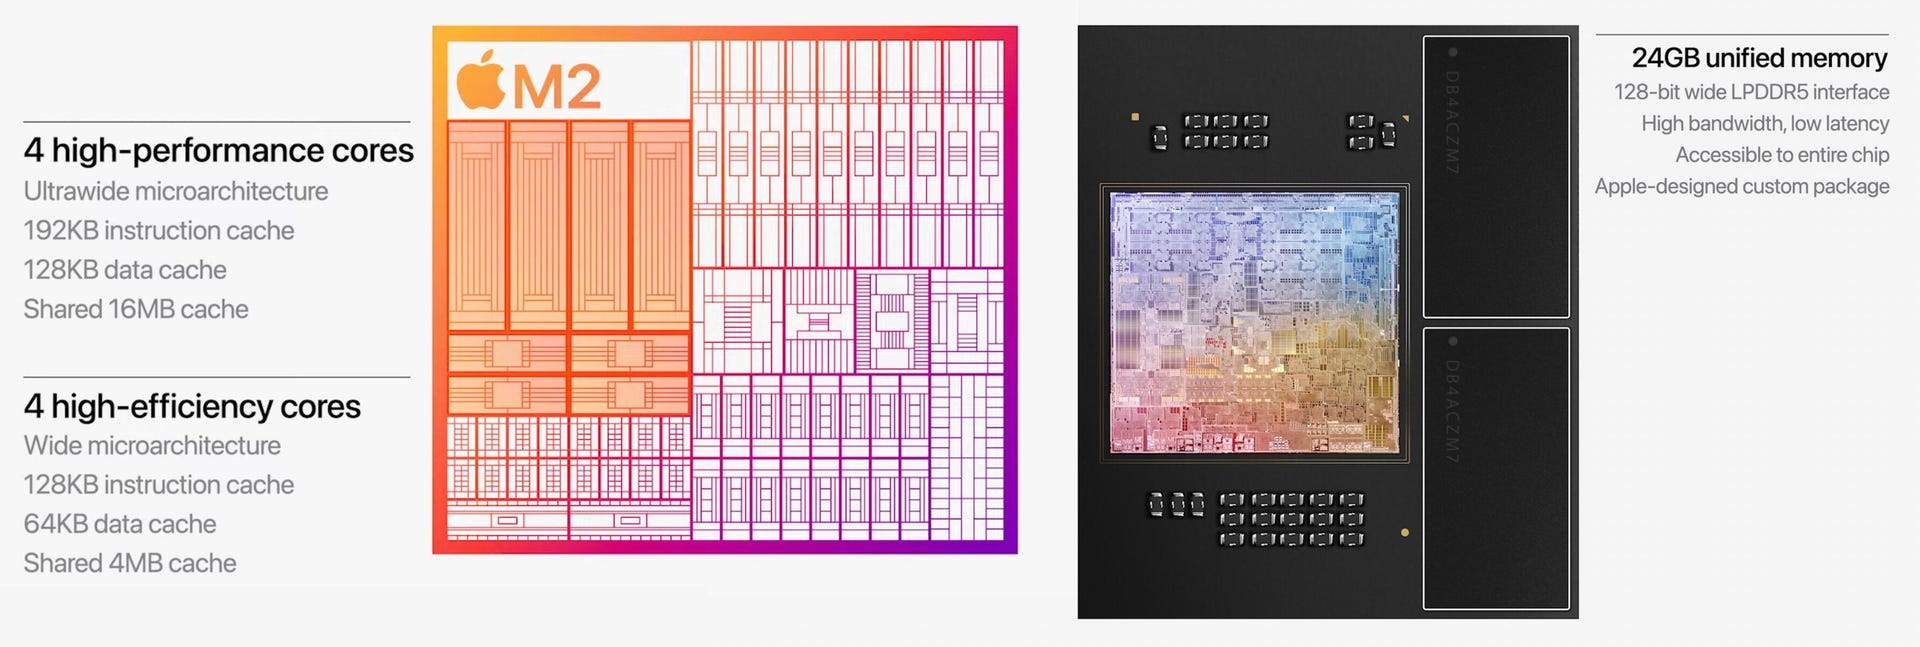 Detailed specifications of Apple's M2 processor that powers new MacBooks